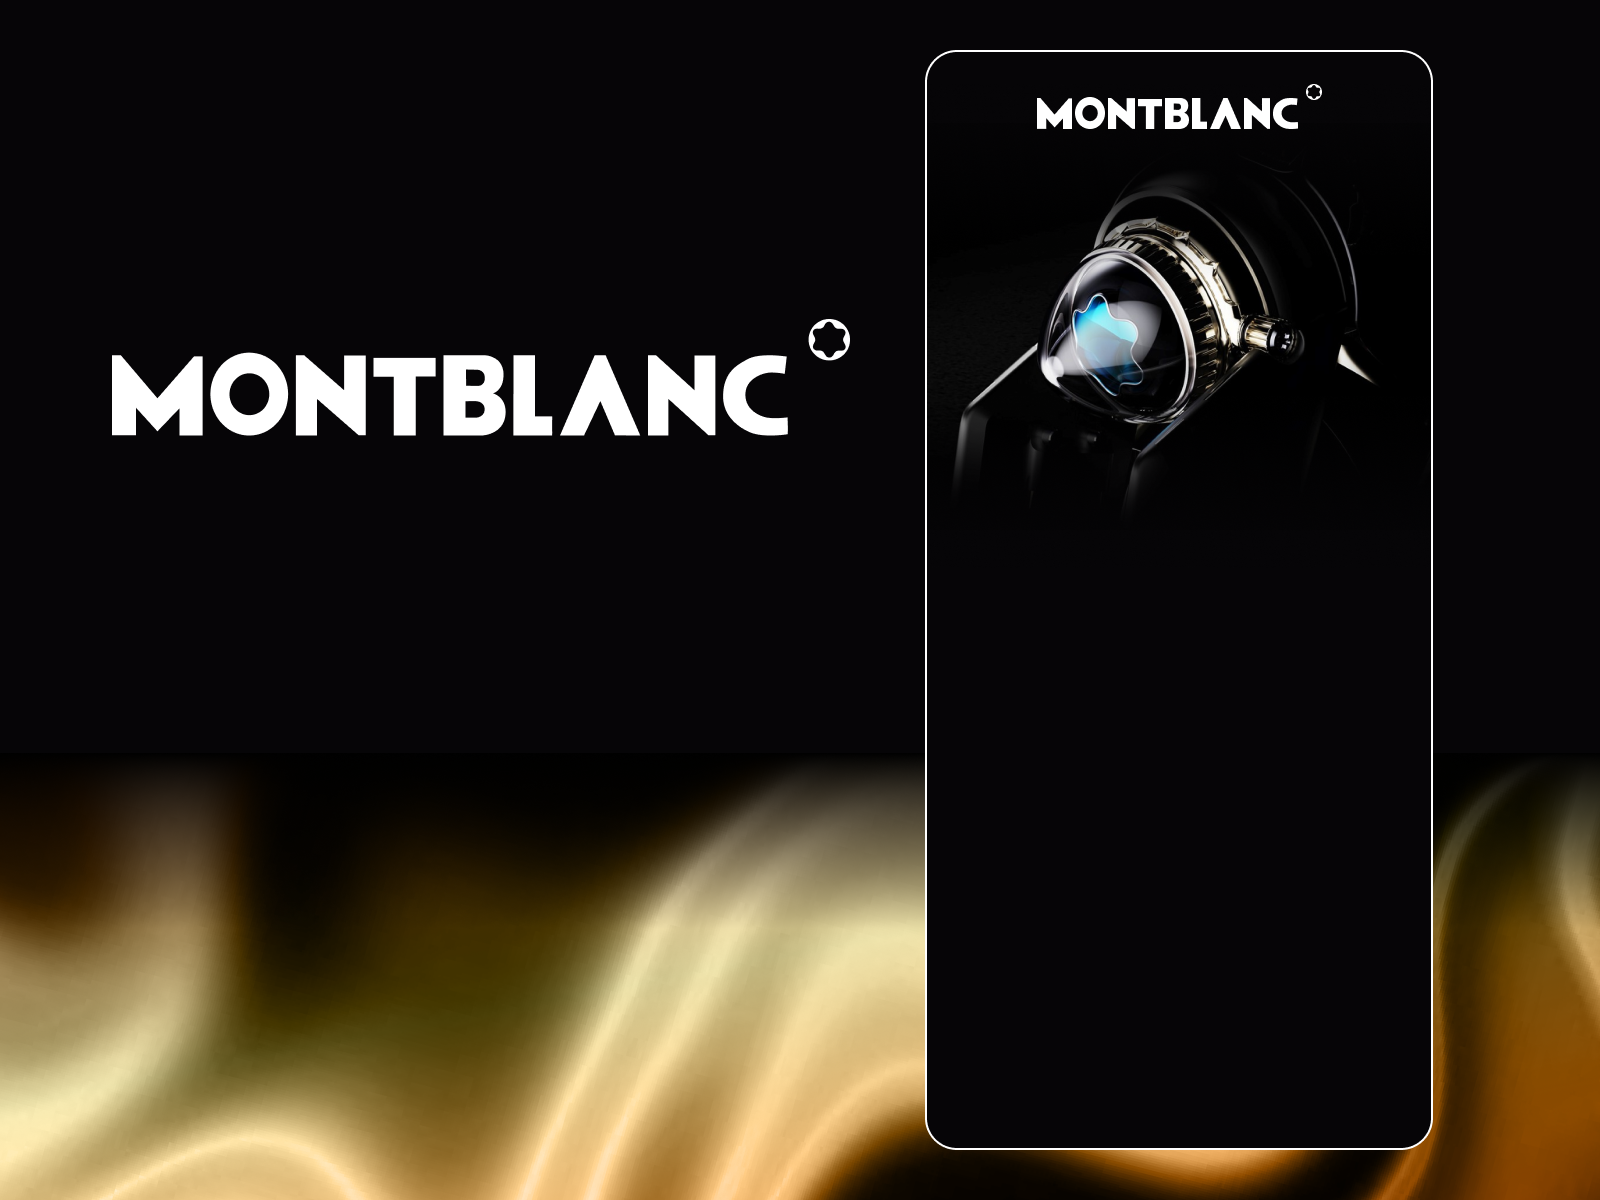 Montblanc � Motorcycle Mobile App for Figma and Adobe XD No 4